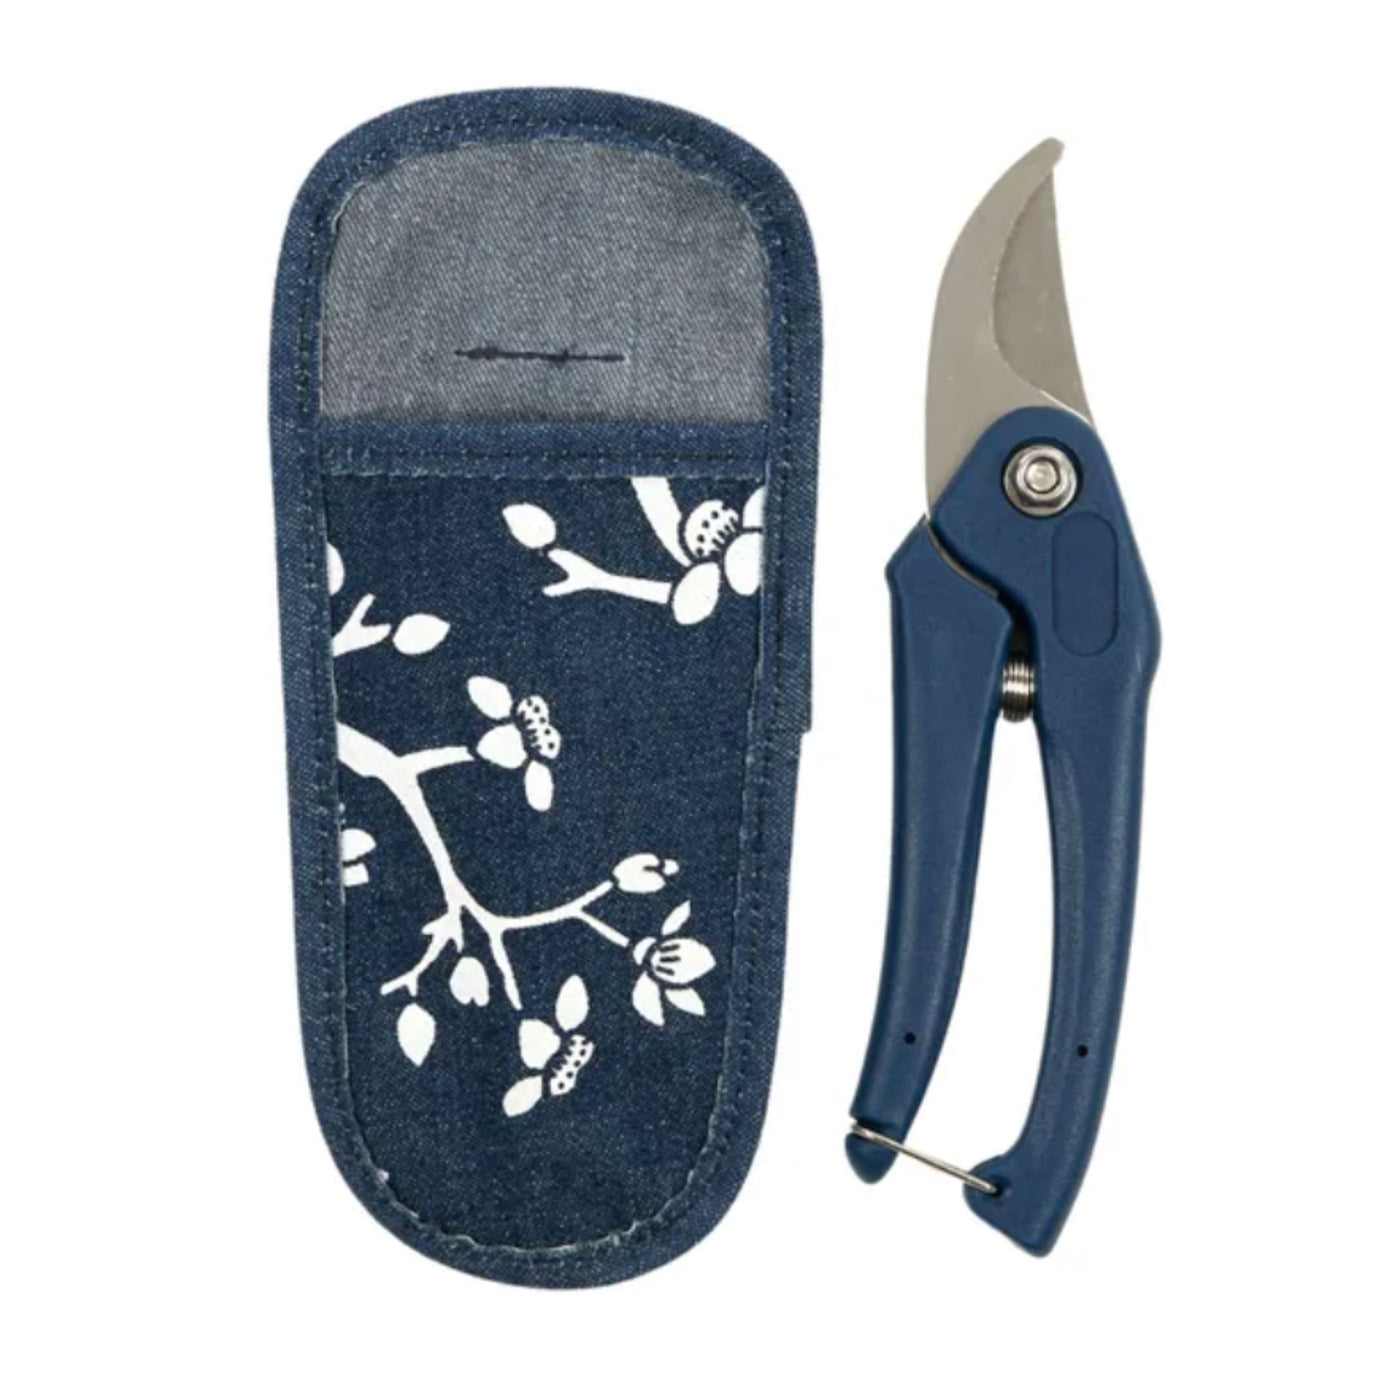 Blossy Pruner With Pouch